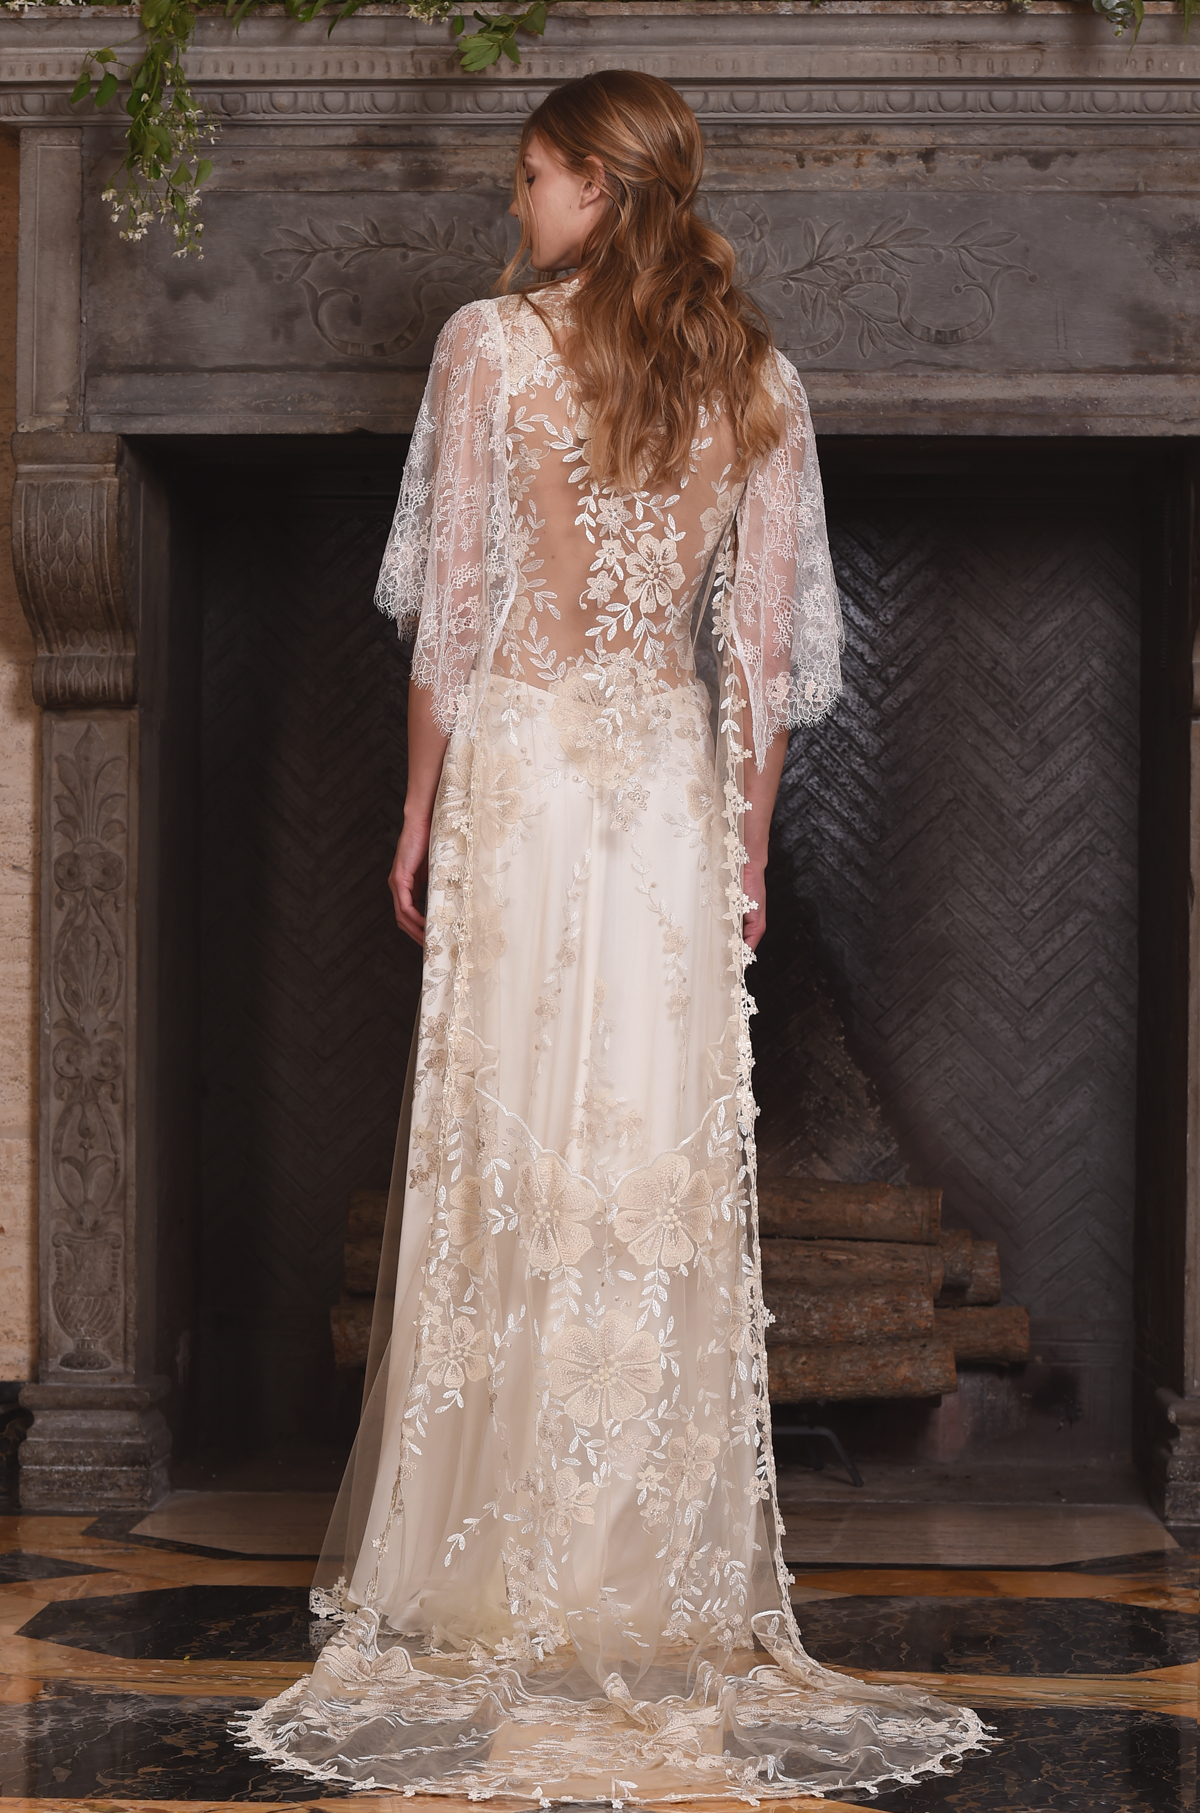 The Reverie Gown, from Claire Pettibone's 'The Four Seasons' bridal couture collection for 2017.